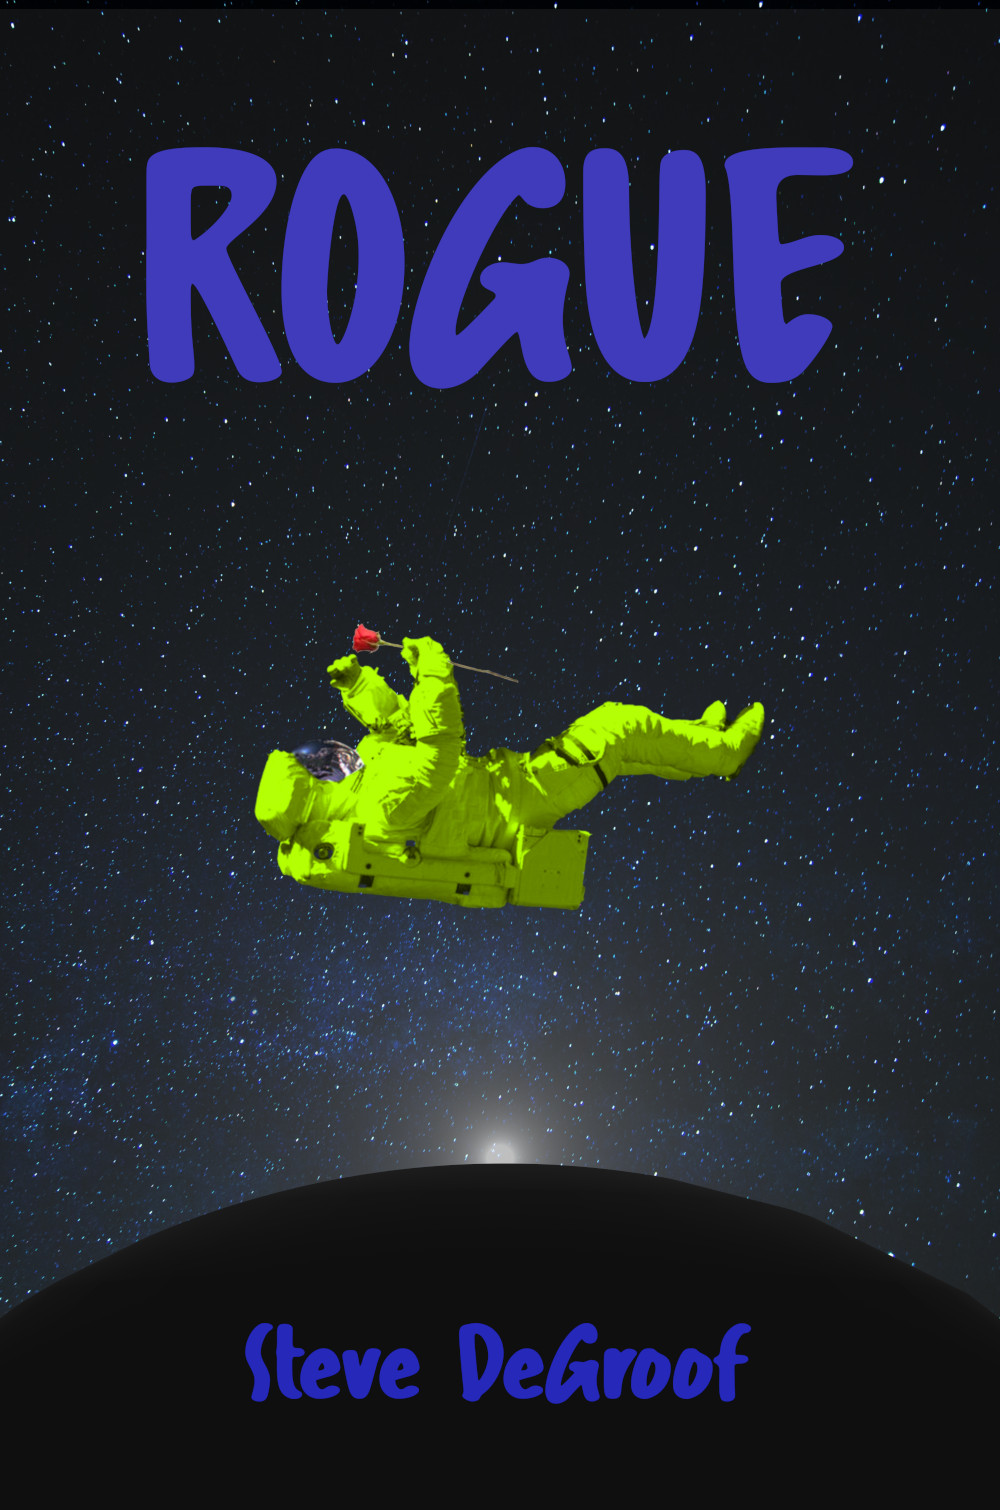 More about Rogue